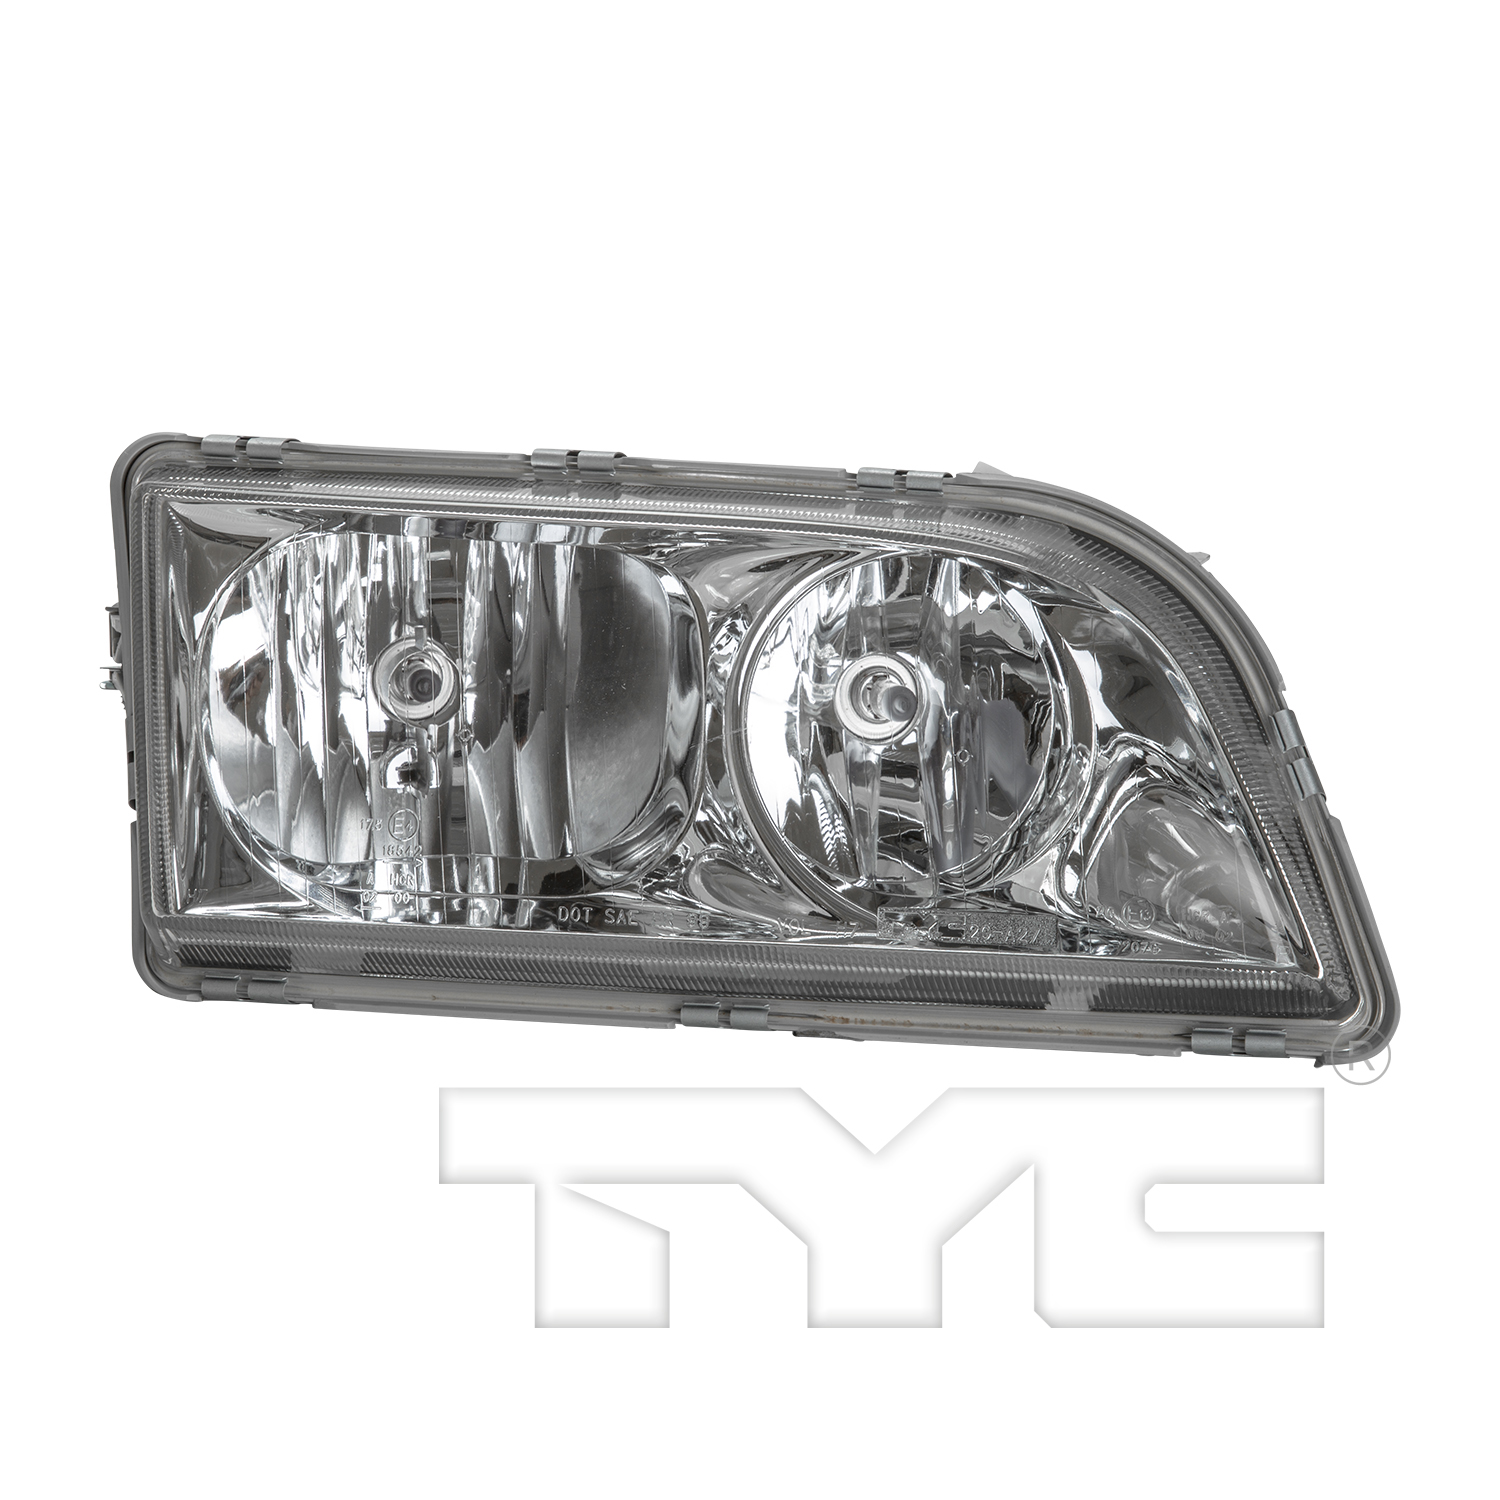 Aftermarket HEADLIGHTS for VOLVO - S40, S40,00-04,RT Headlamp assy composite